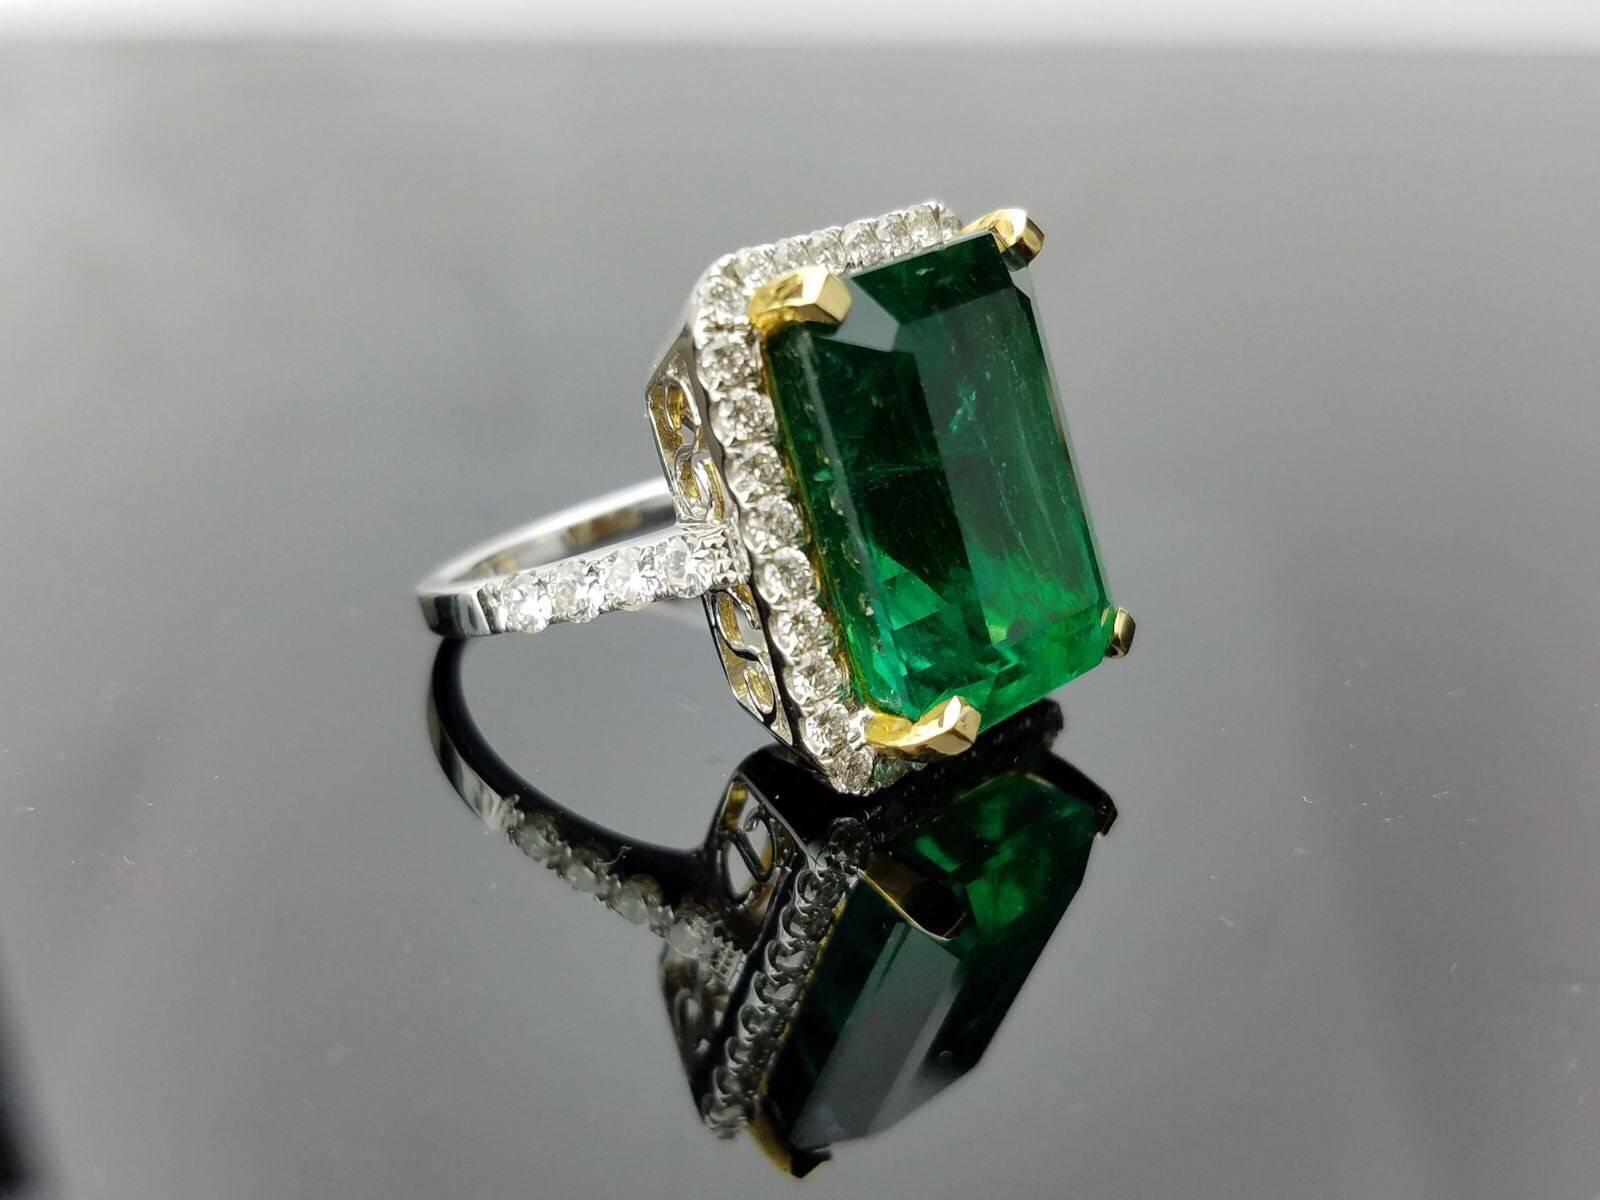 Beautiful and Lustrous, High Quality Zambian Emerald Cocktail Ring outlined with Diamond, all set in 18 White Gold and Yellow Gold prongs. 

Stone Details:  
Stone: Zambian Emerald
Cut: Emerald Cut
Carat Weight: 15.19 carat

Diamond Details:
Cut: